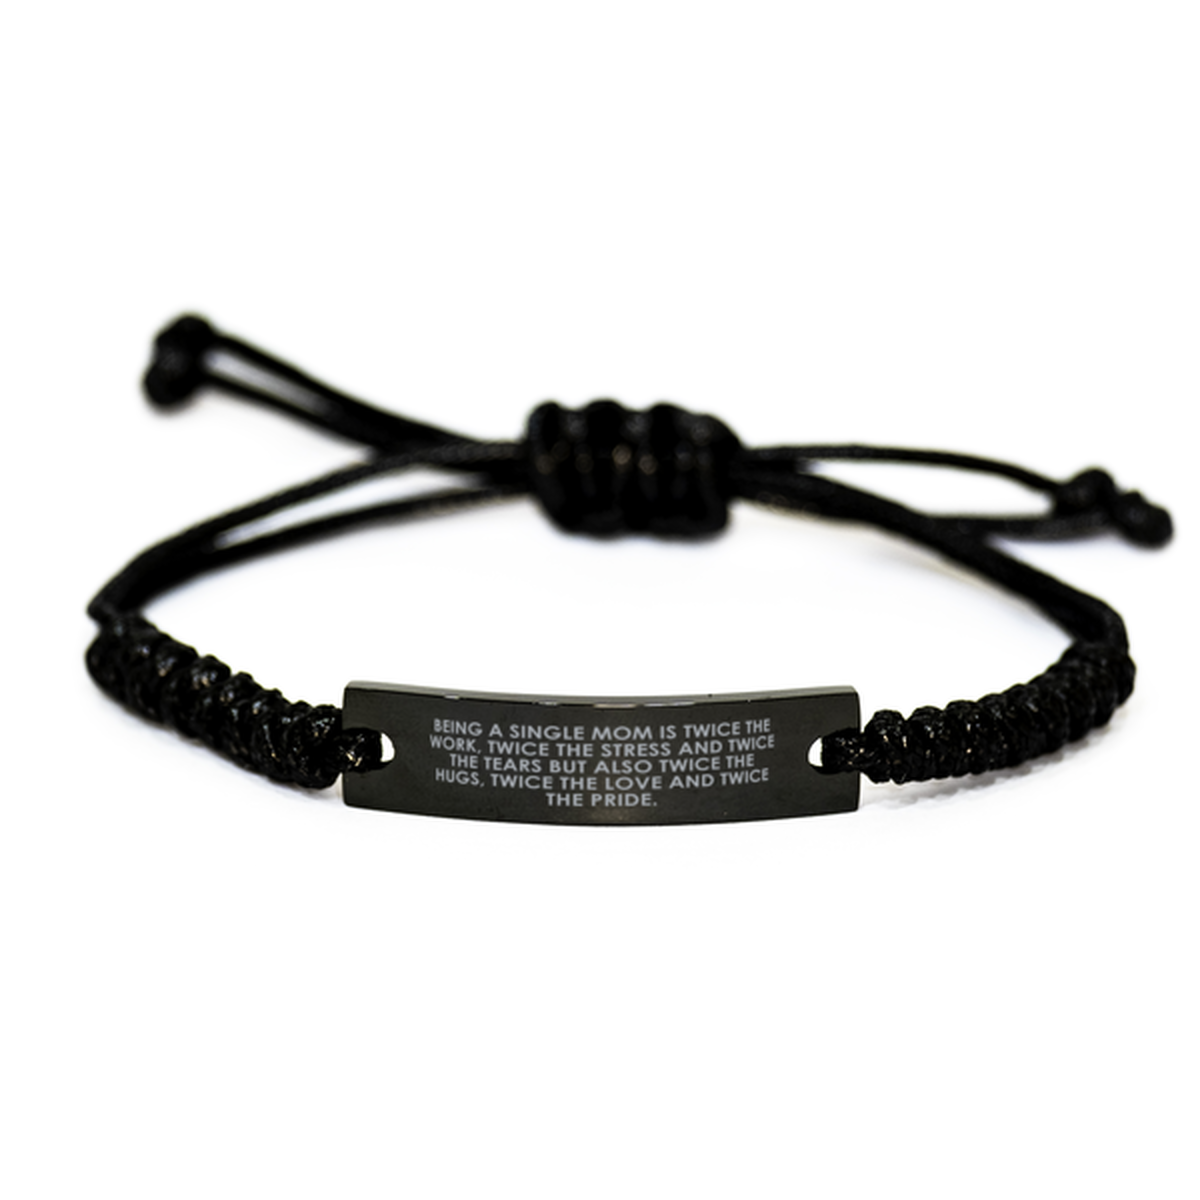 To My Single Mom Rope Bracelet, Twice The Work, Valentines Gifts For Single Mom From Friends, Birthday Gifts For Women